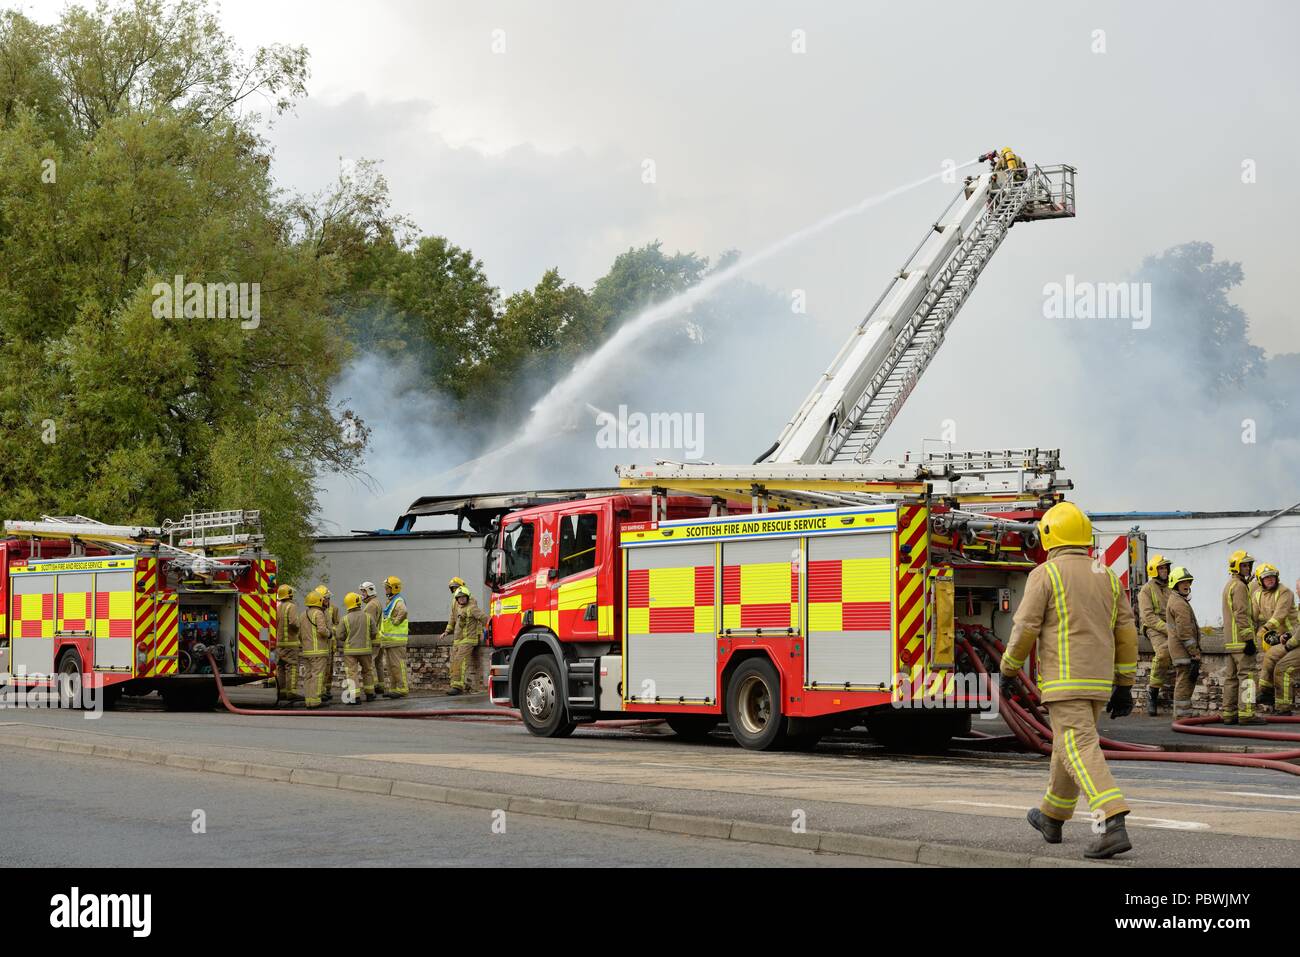 Glasgow, UK. 30th July, 2018. Glasgow, Scotland, UK. A large fire forces the closure of Crookston Rd in Glasgow as fire appliances line the street and firefighters use breathing apparatus and high reach platforms to tackle the blaze. Credit: Douglas Carr/Alamy Live News Stock Photo